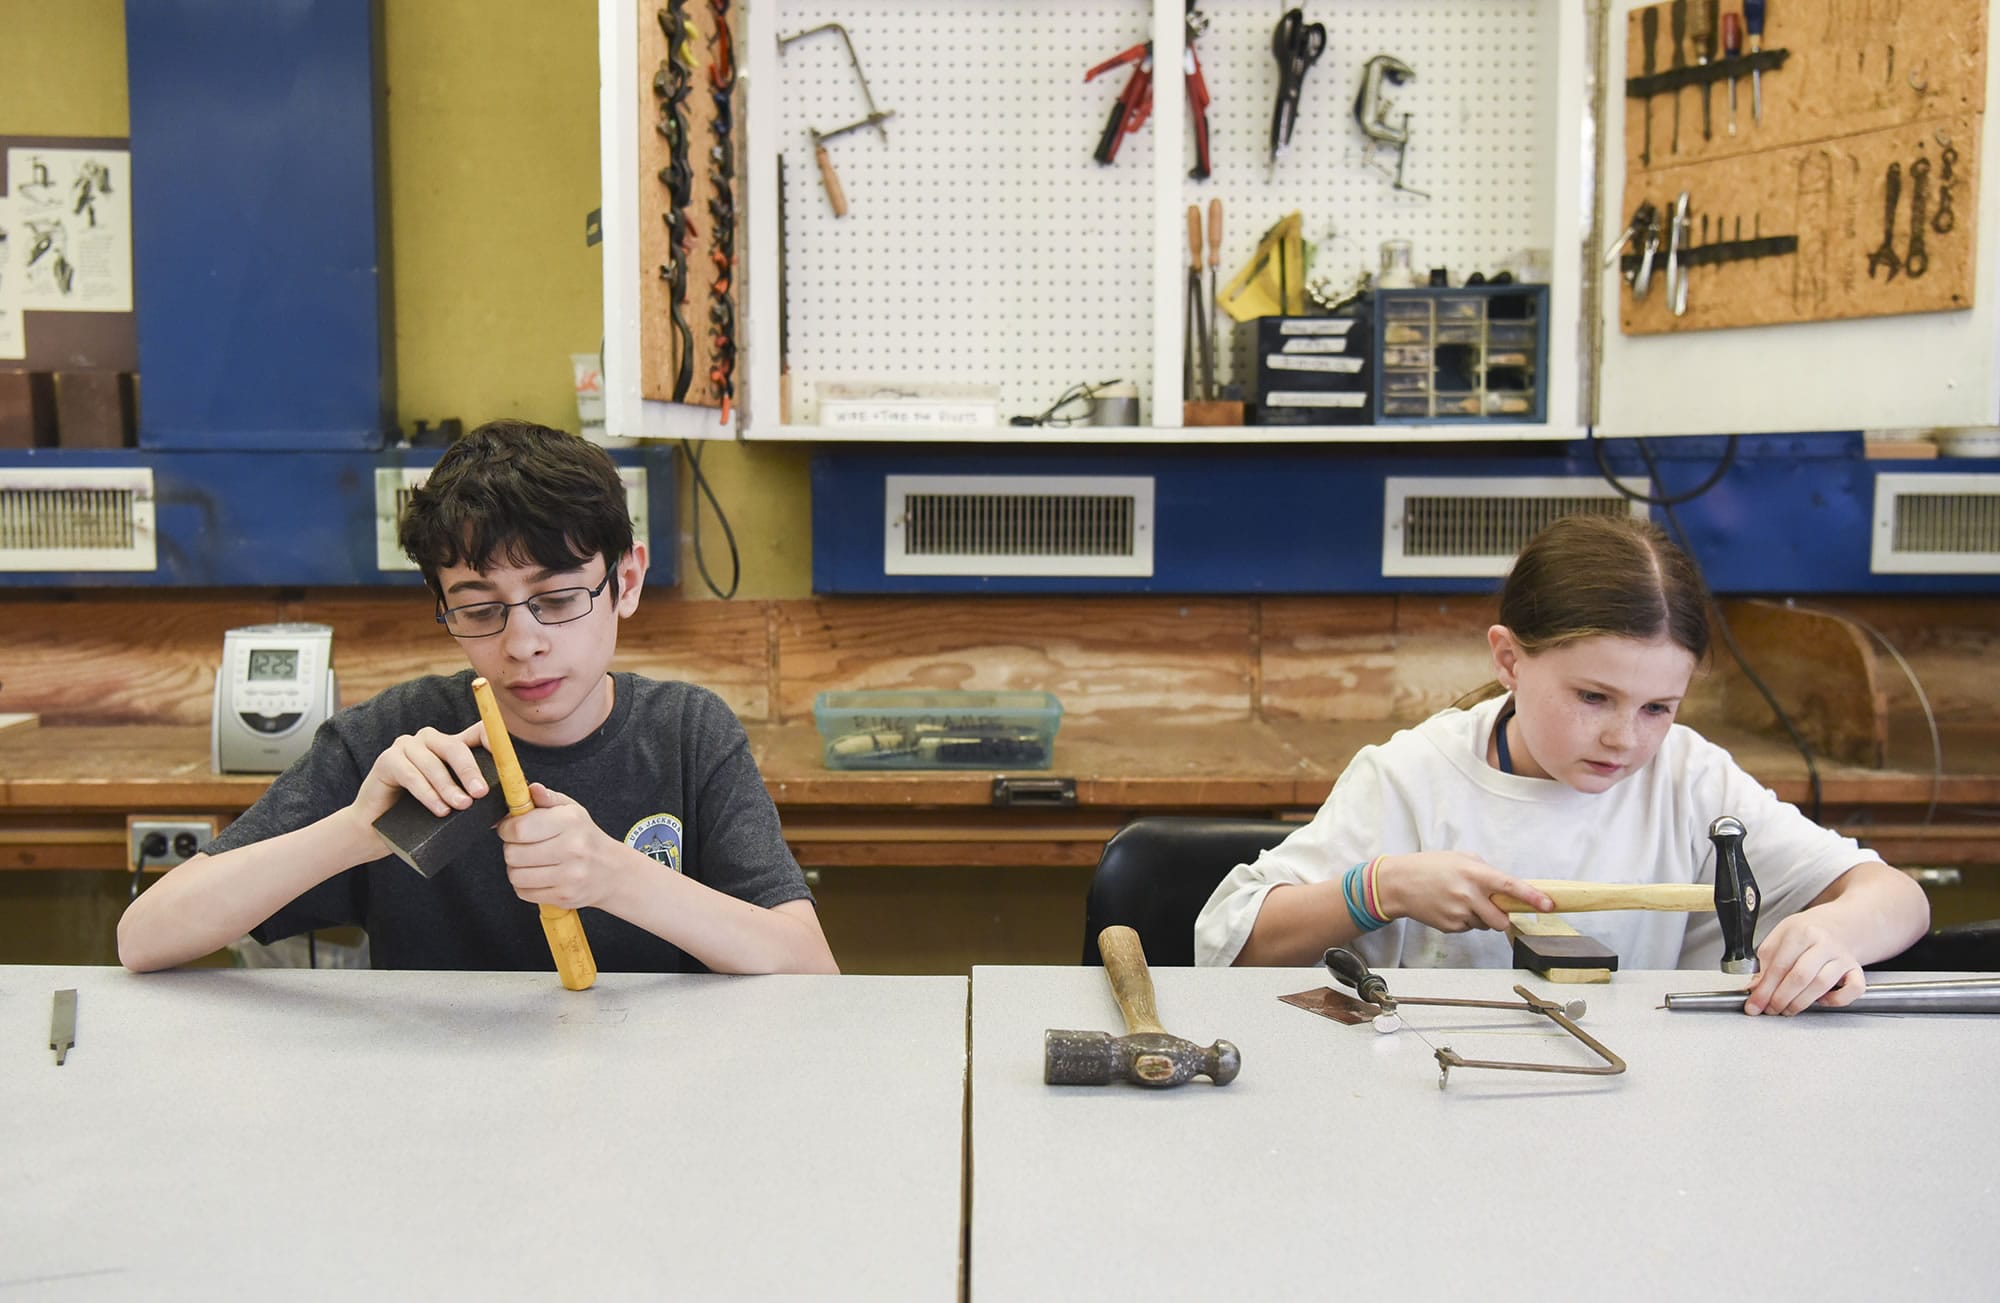 Sam Corio, 13, left, and Emily Rodengren, 10, make careful adjustments Tuesday to rings they made in a metal arts class at Art College, a summer camp at Clark College for students ages 9-14.